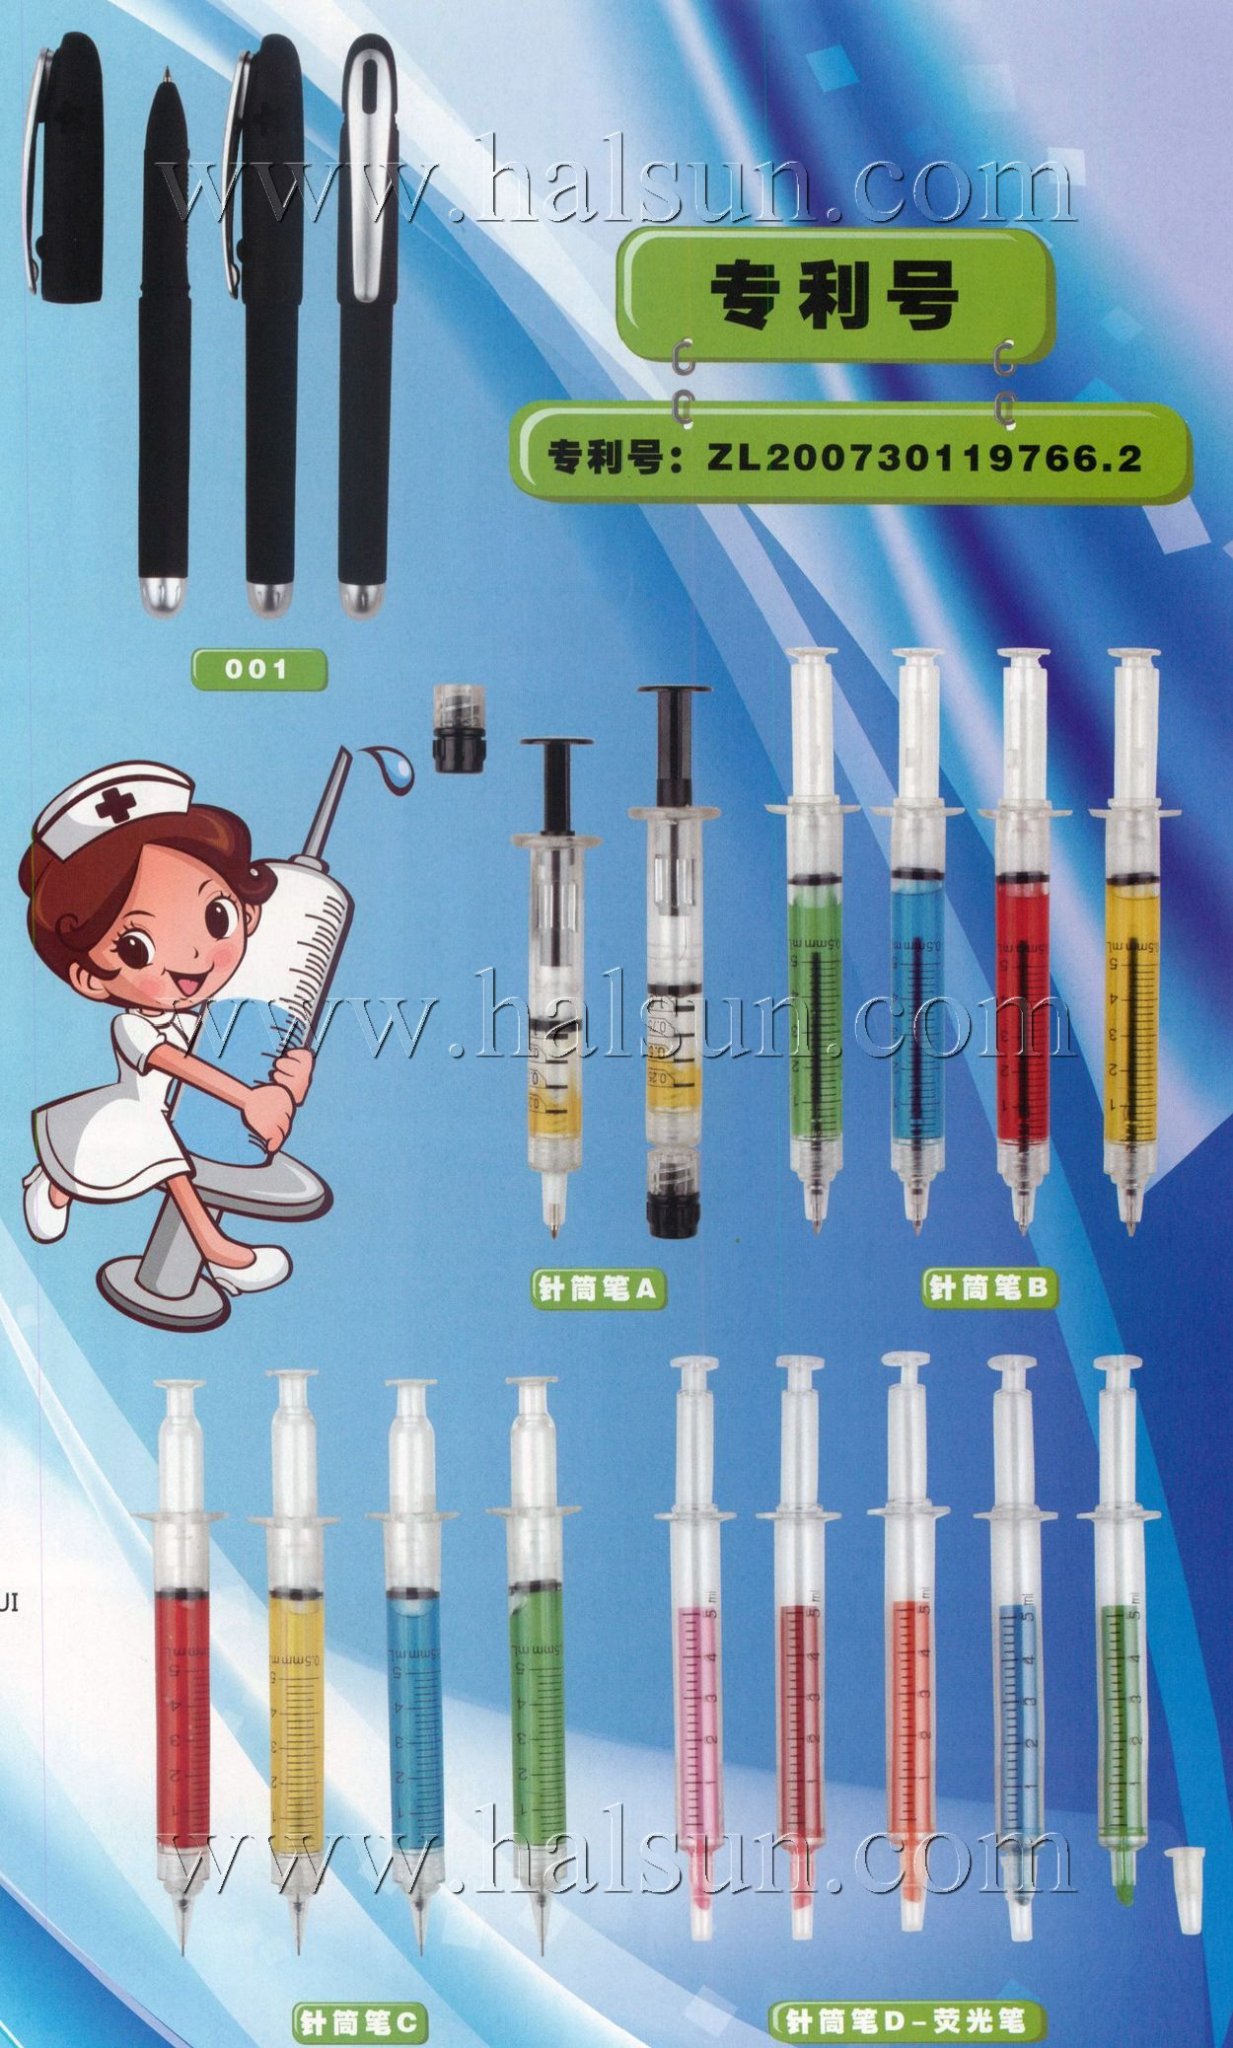 Injector ball pens,injector pencil,injector highlighters,Ball Pens_2014_09_21_15_07_53